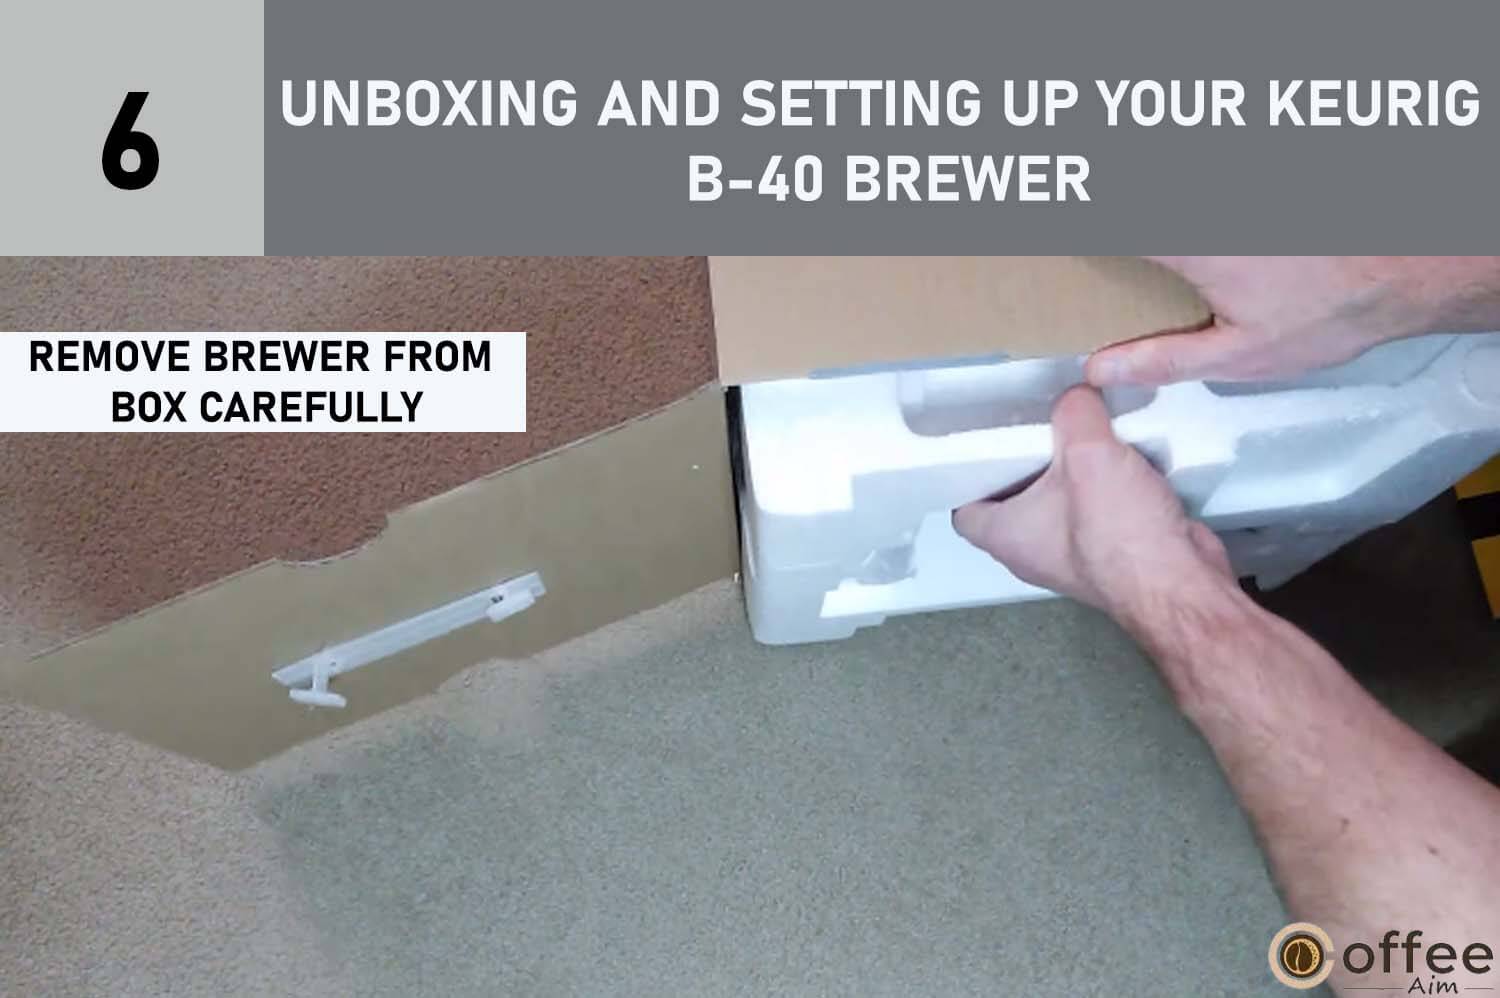 Unveiling Your Keurig B-40 Brewer: Mastering the Art of Carefully Unboxing and Setting Up" for the comprehensive guide on effectively using the Keurig B-40 model. This accompanying image vividly illustrates the meticulous process of removing the brewer from its packaging, ensuring a seamless and secure start to your Keurig journey.